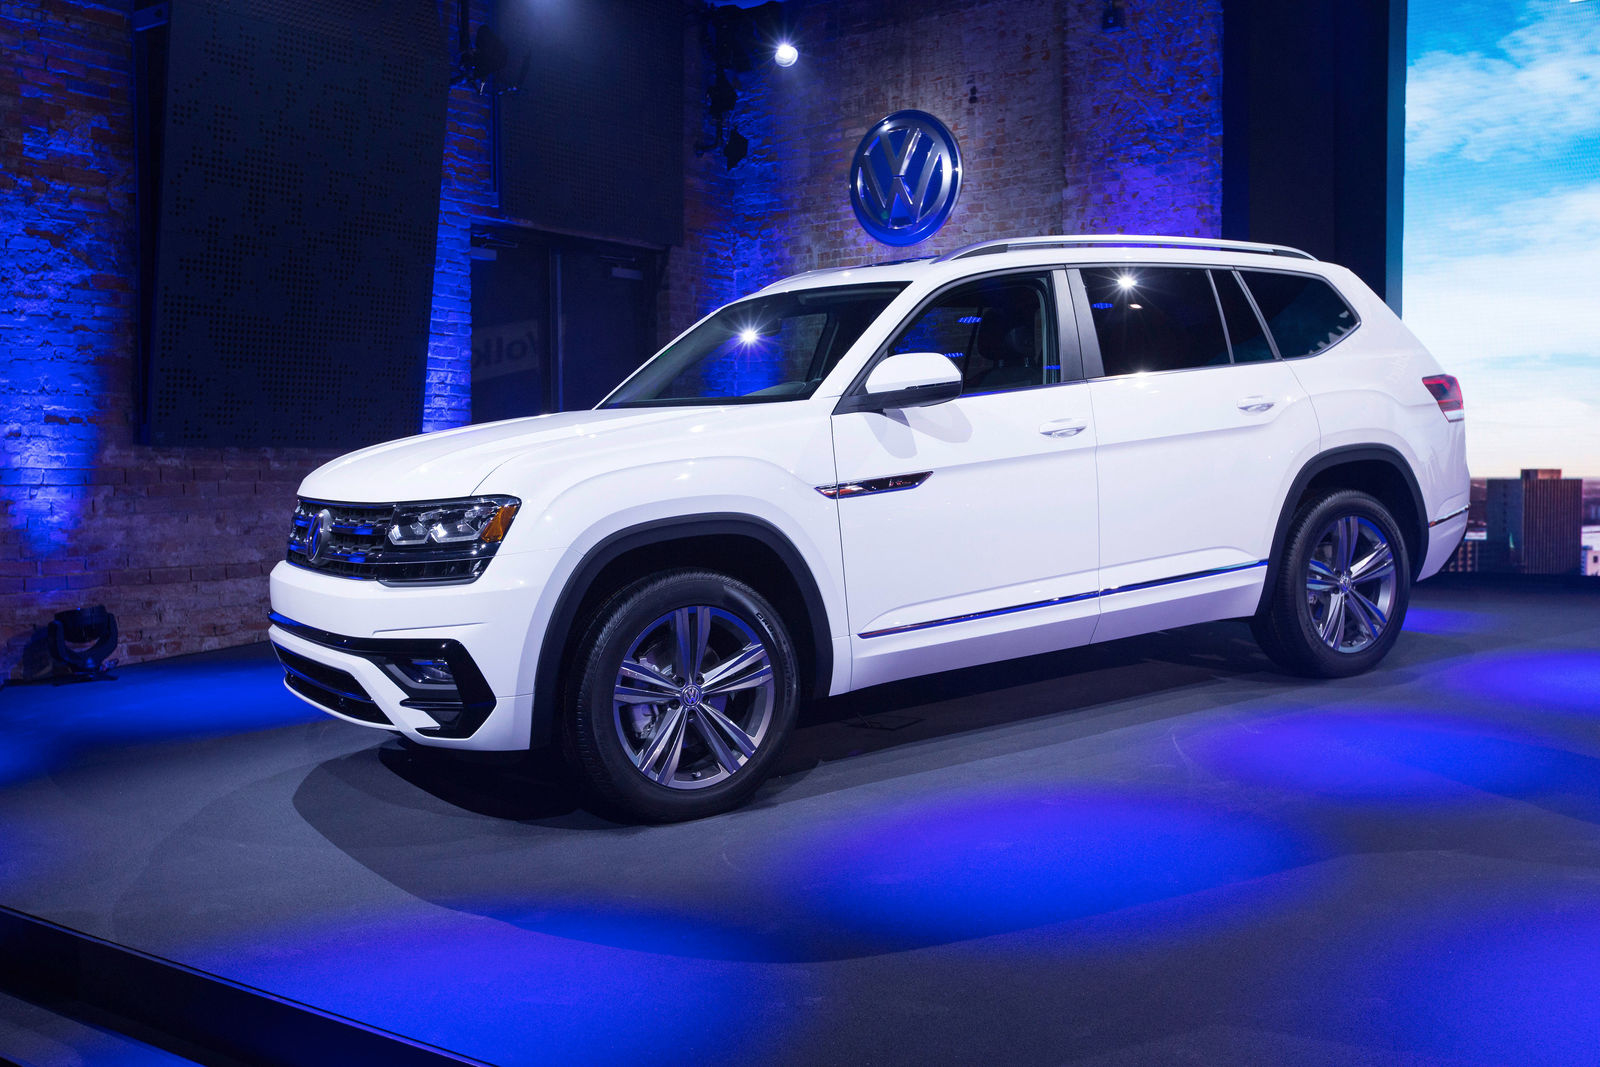 Volkswagen Media Preview on the eve of the North American International Auto Show (NAIAS) in Detroit